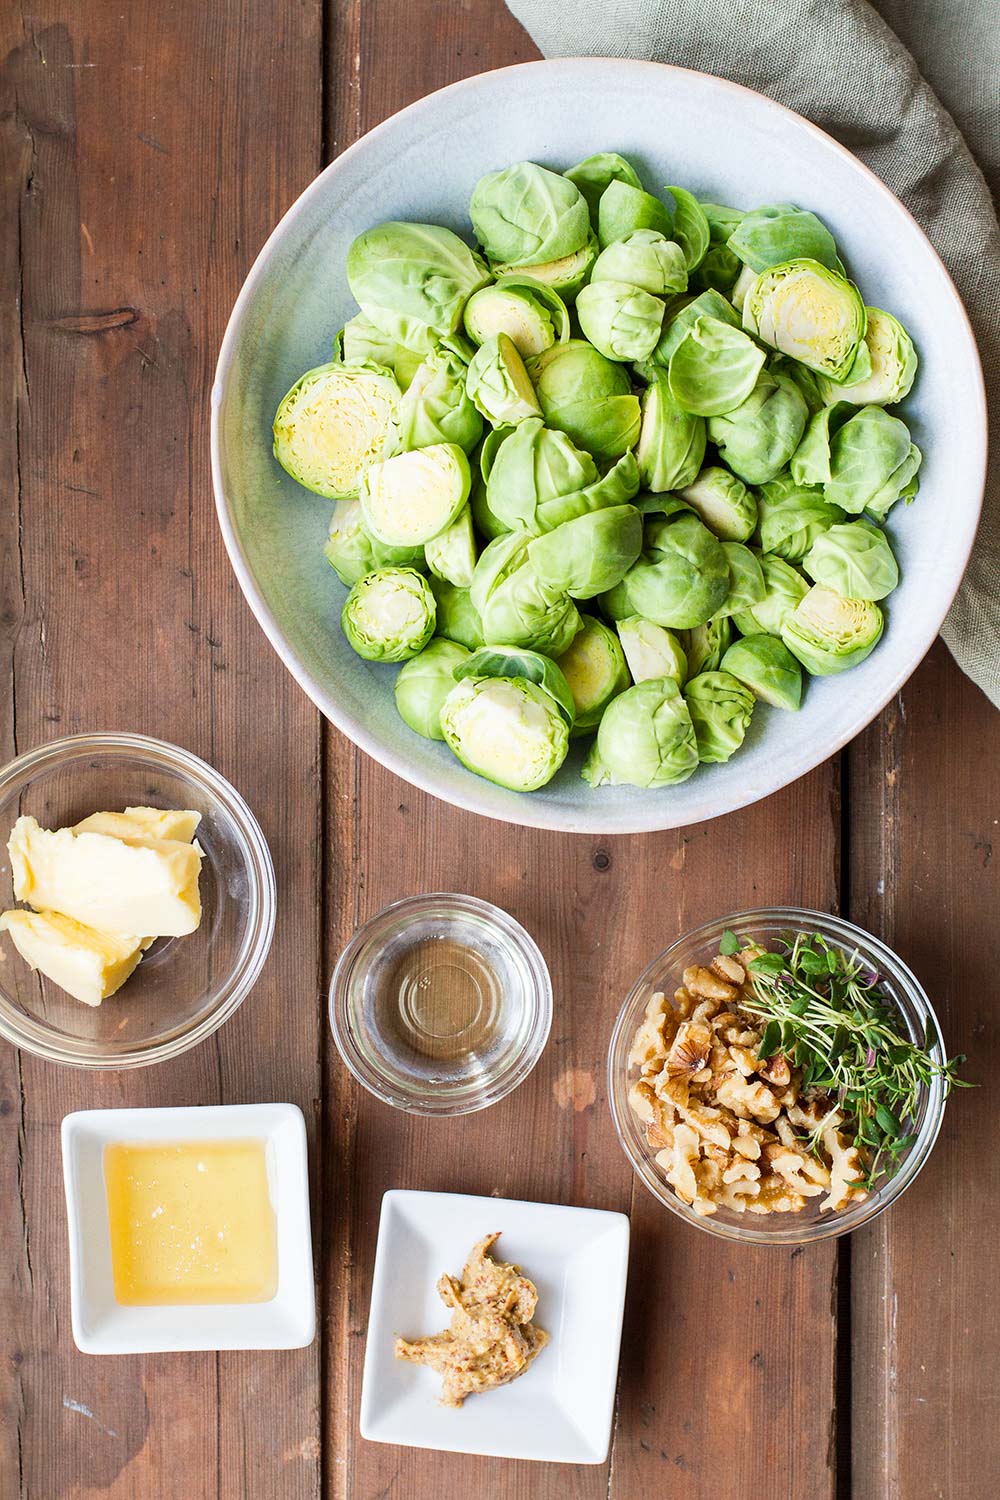 Ingredients to make butter crispy brussels sprouts.